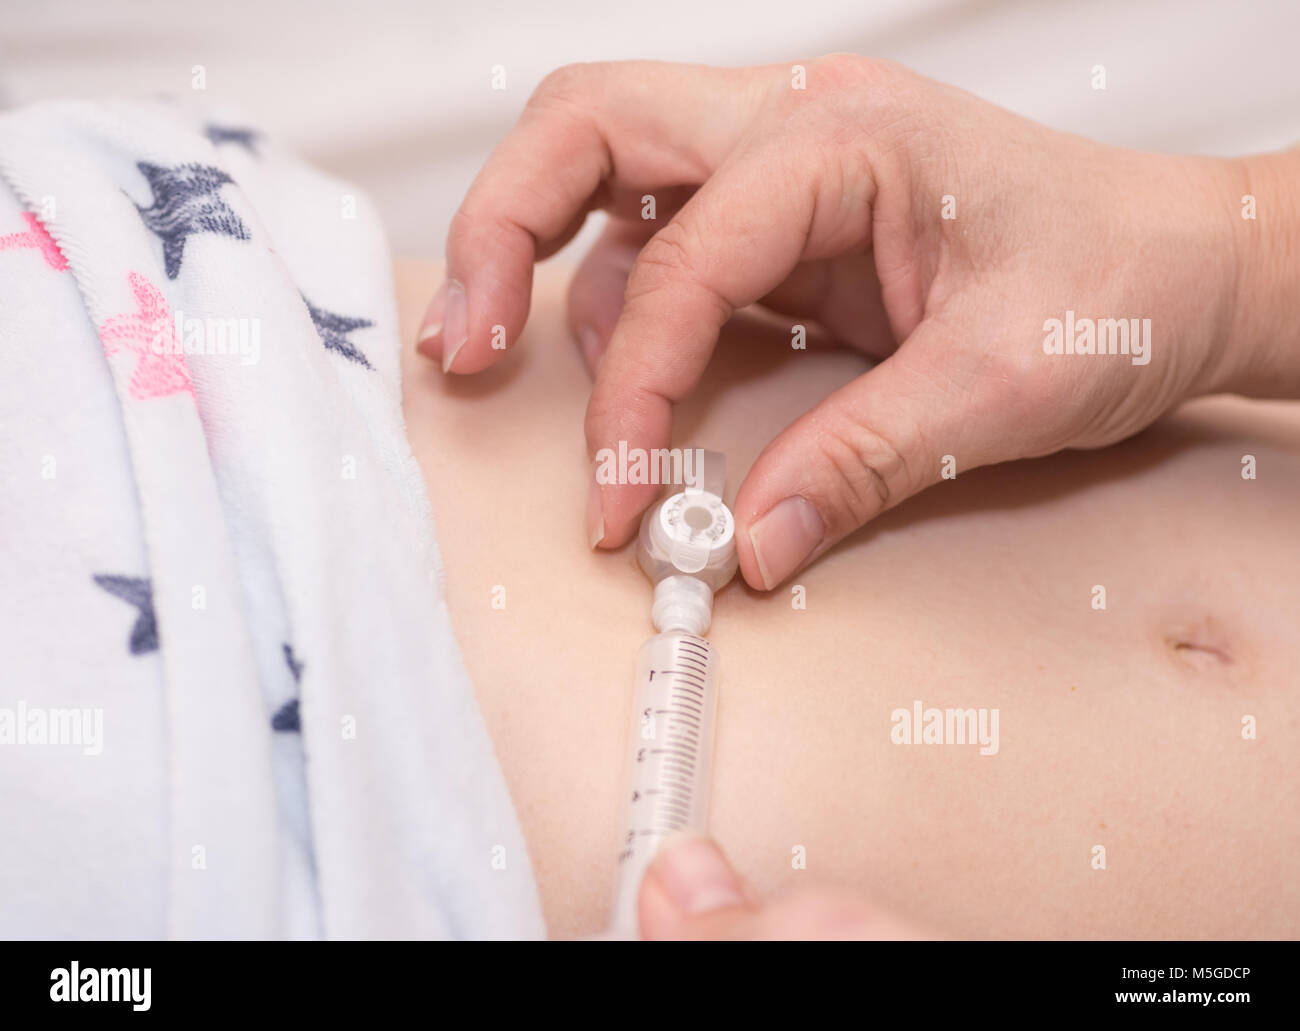 A medical feeding tube being used on a child Stock Photo